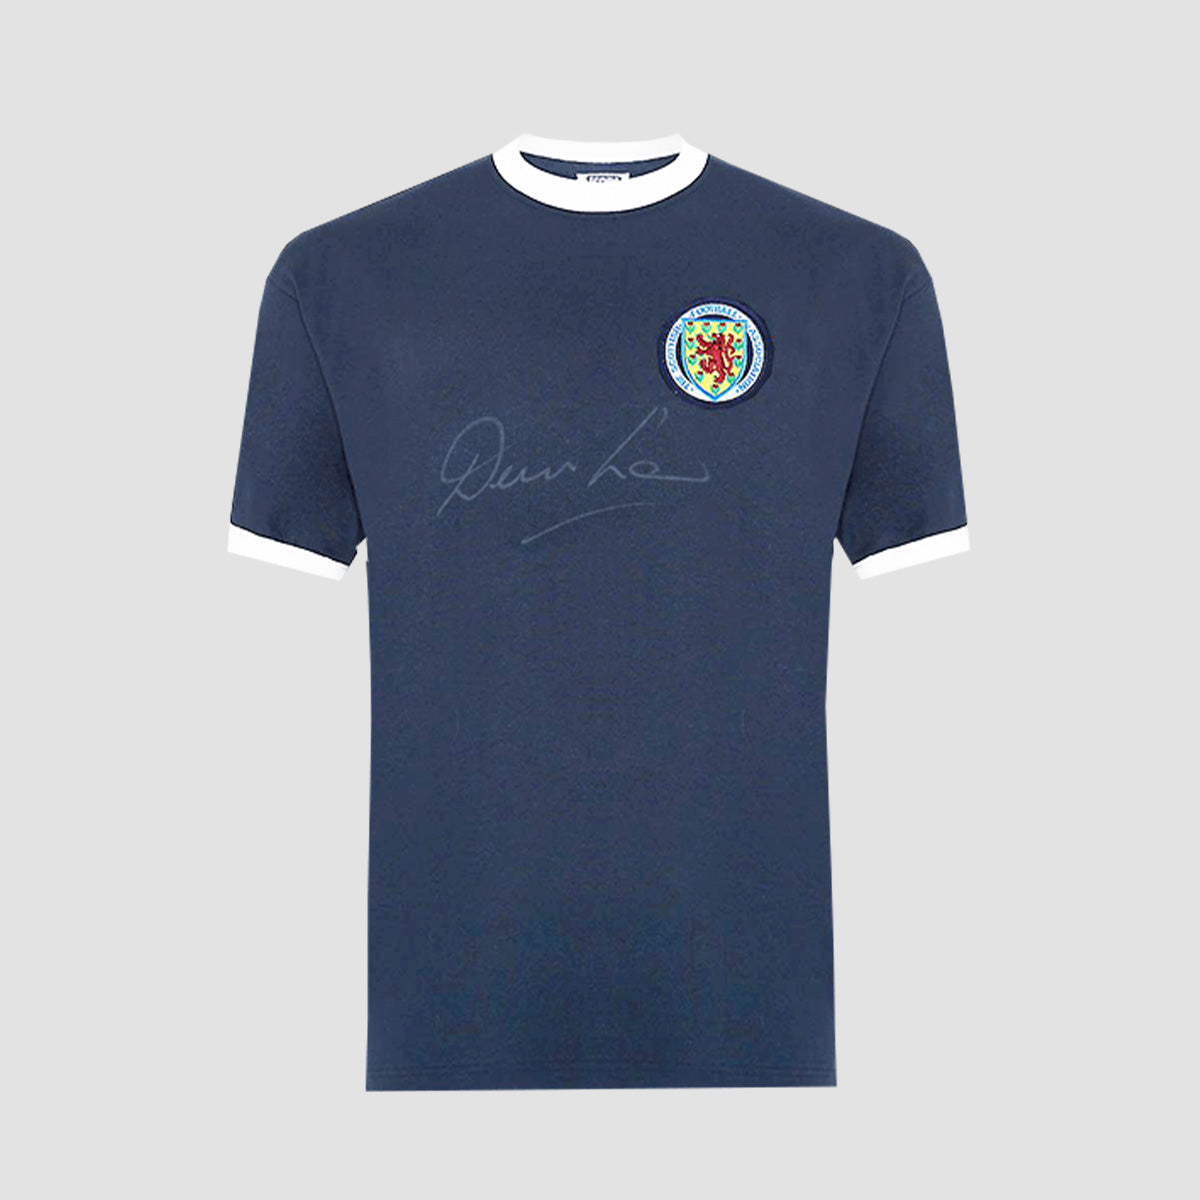 Denis Law Front Signed Retro Scotland Home Shirt (Boxed)